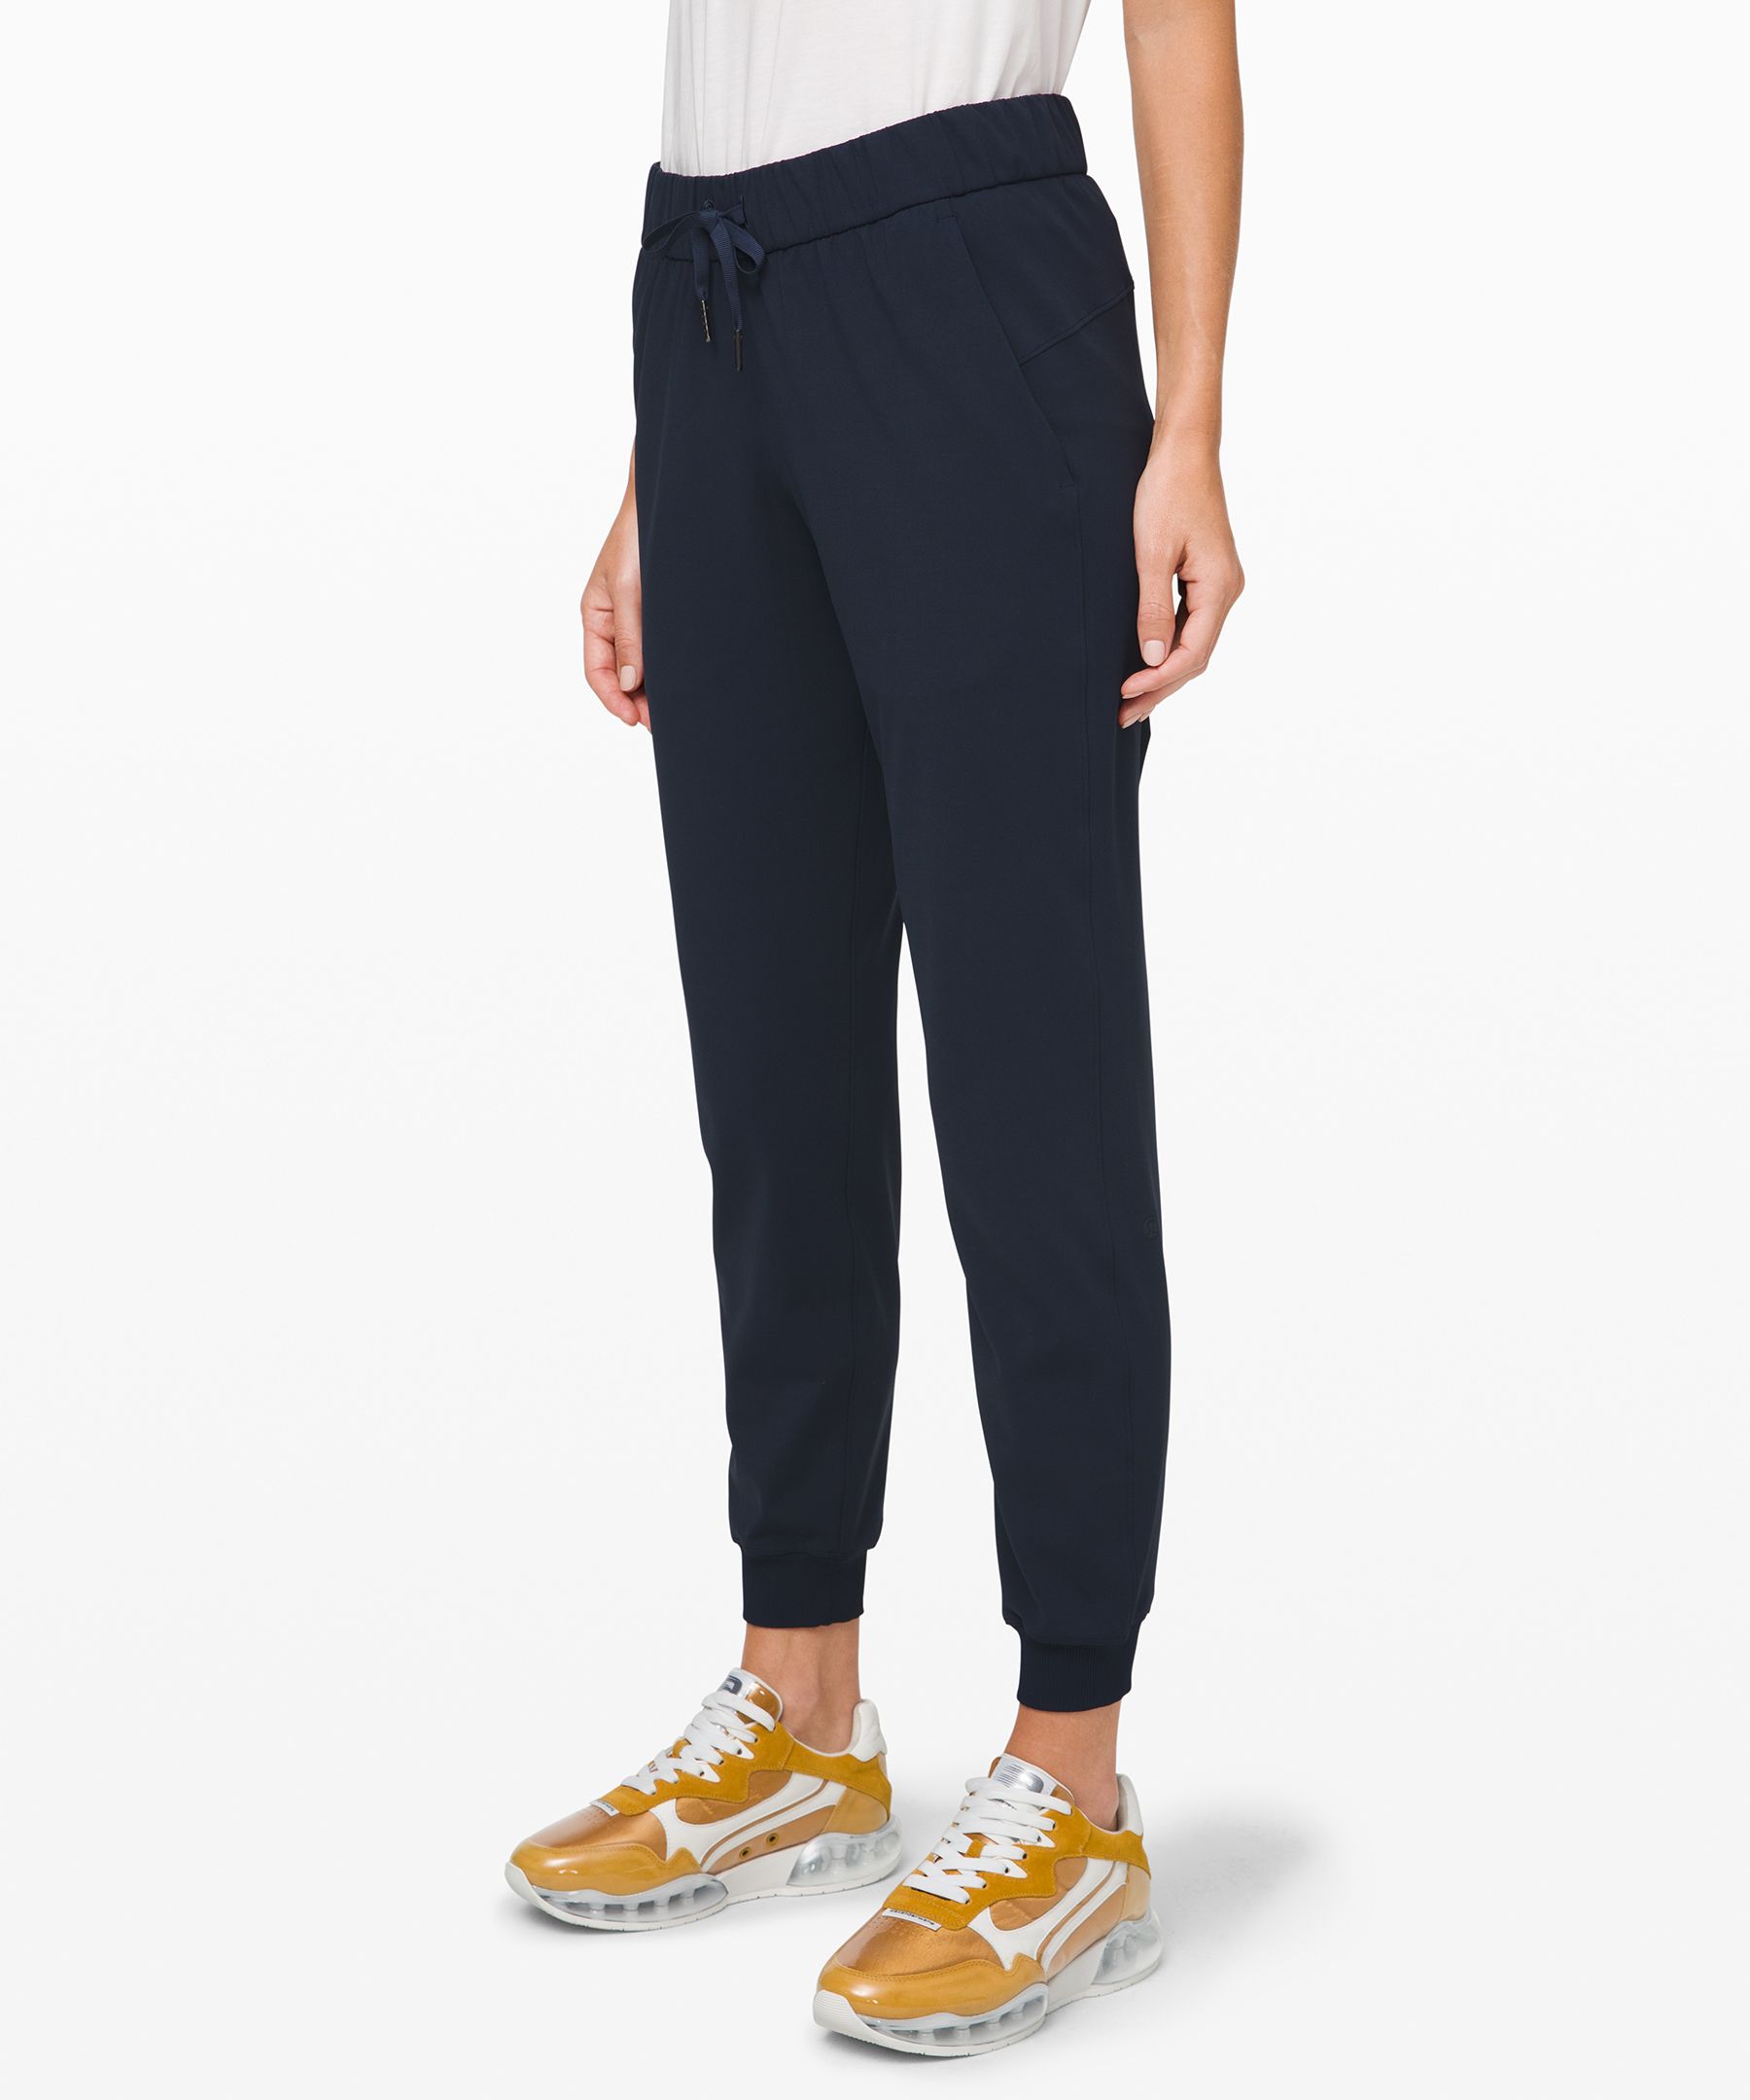 Lululemon on the fly jogger woven size 4 brand new Philippines